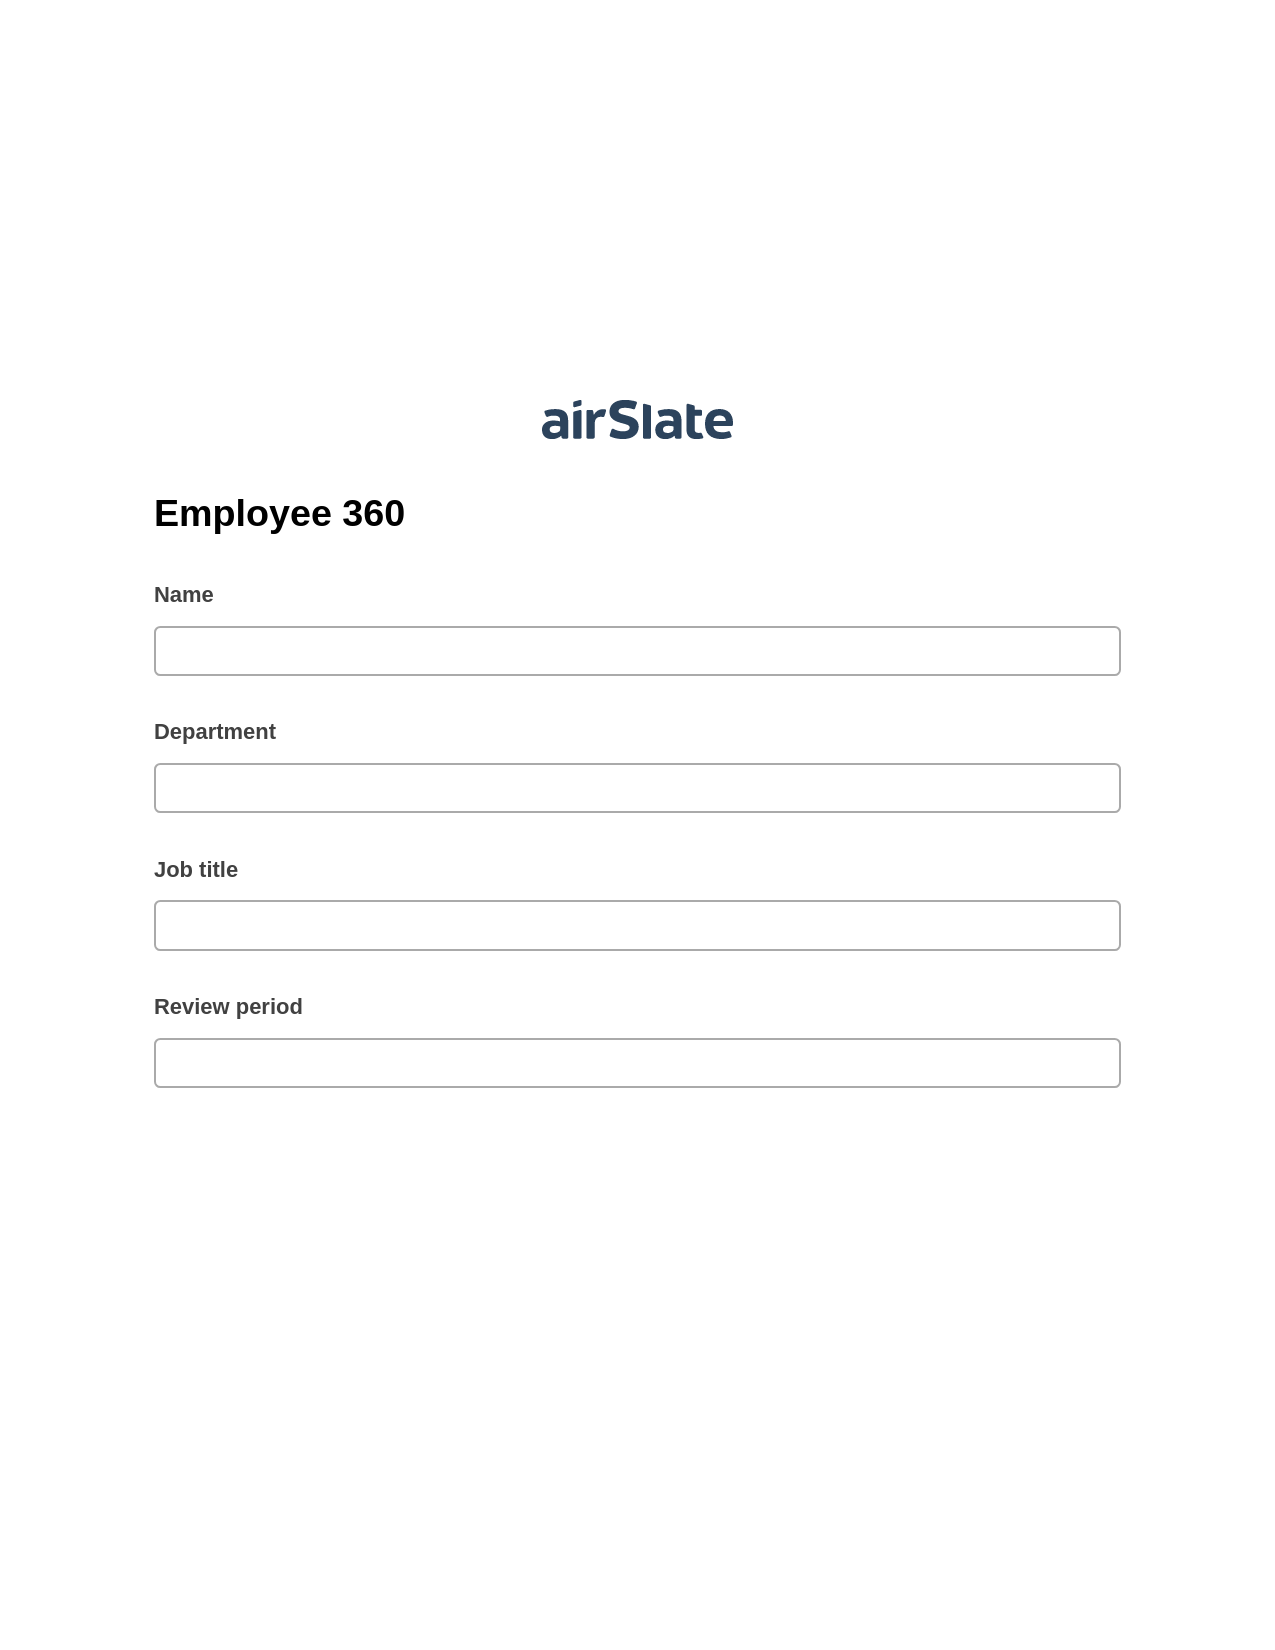 Employee 360 Pre-fill from AirTable Bot, Update MS Dynamics 365 Record Bot, Webhook Postfinish Bot